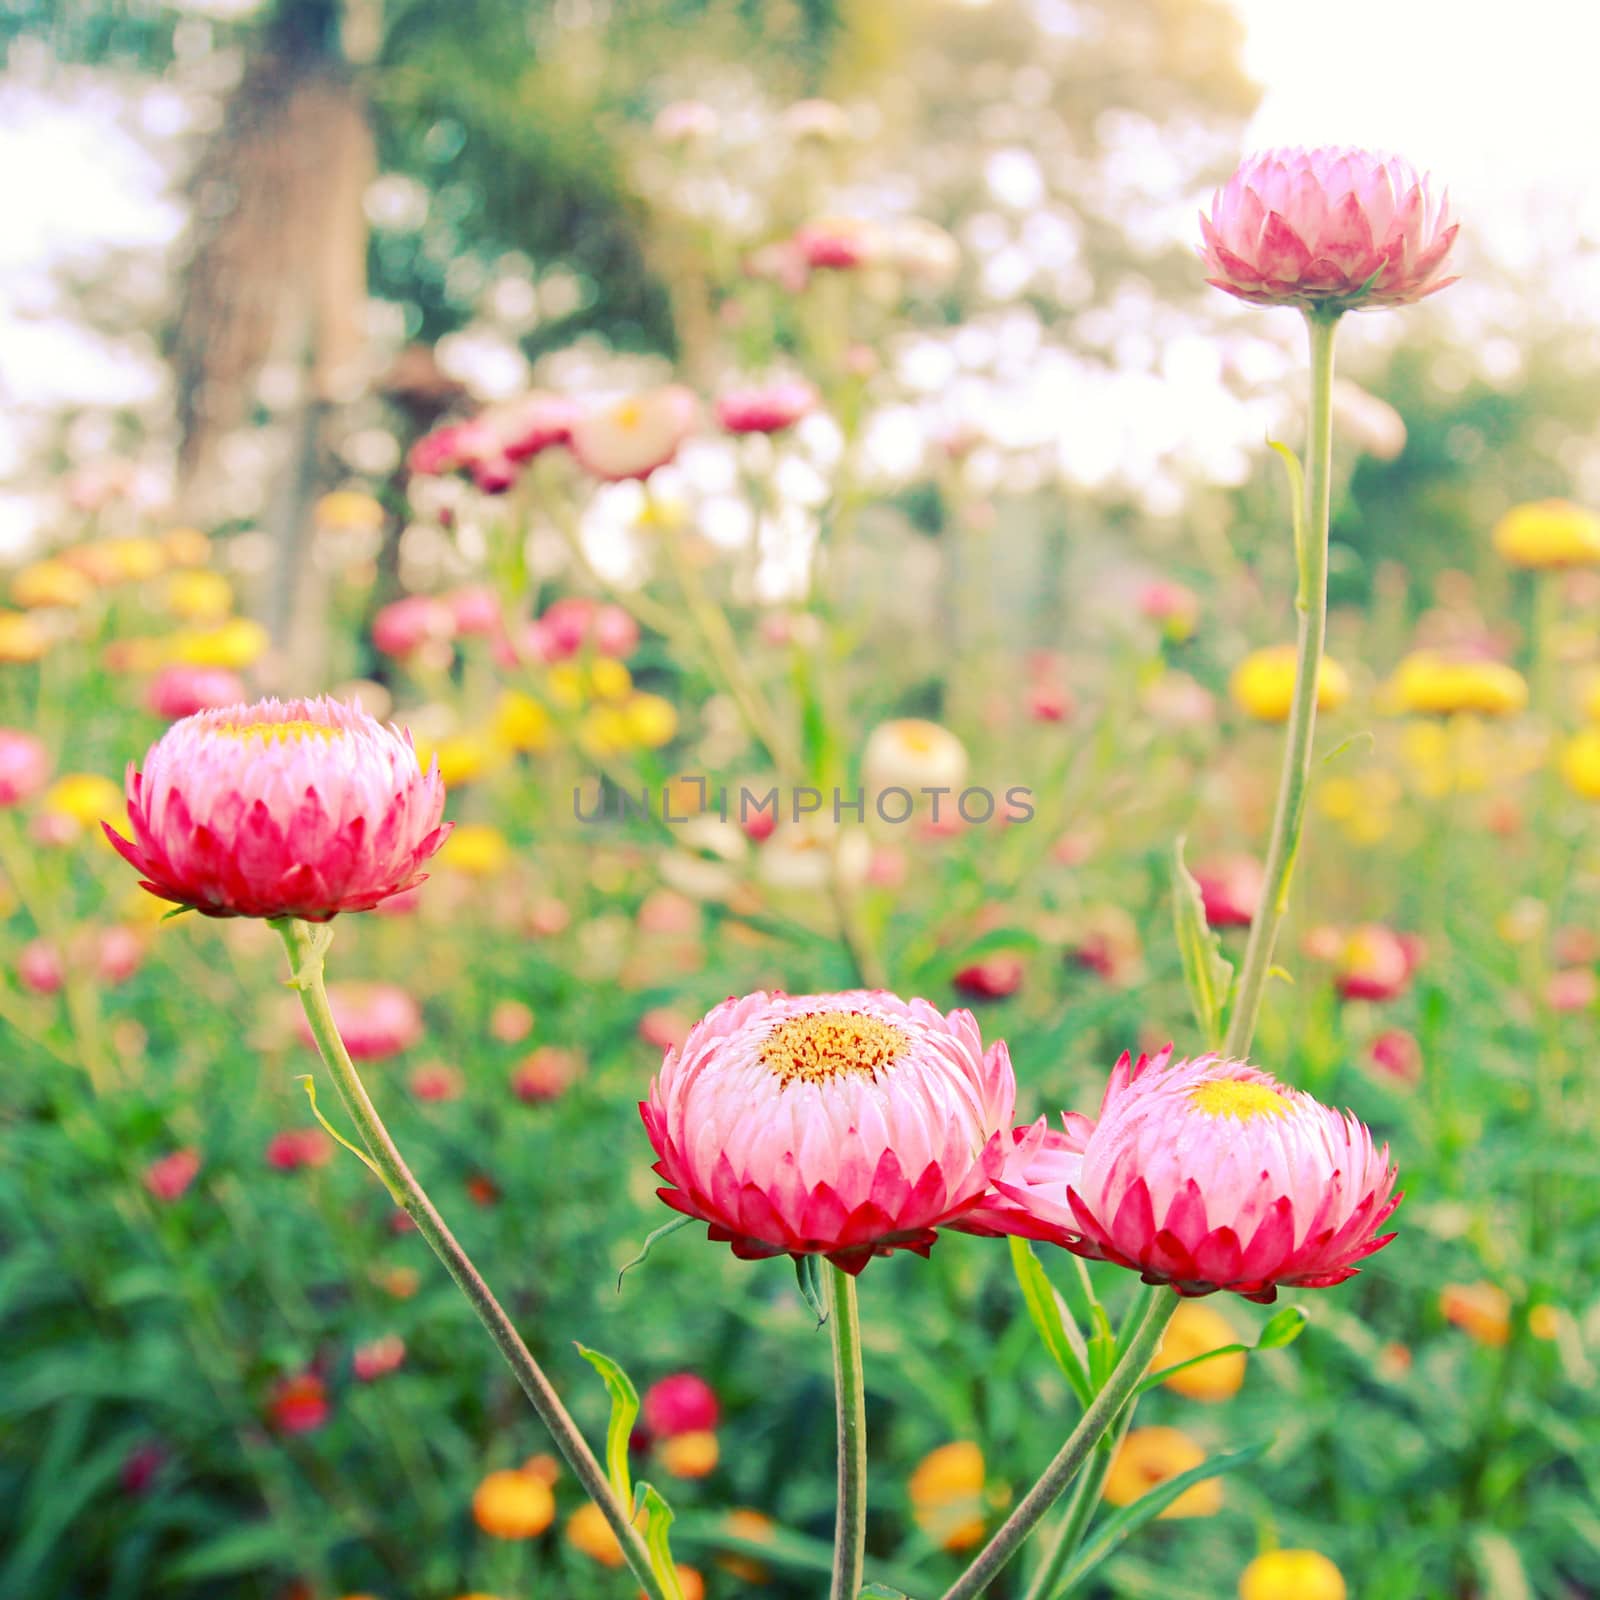 Small flowers in garden with retro filter effect  by nuchylee